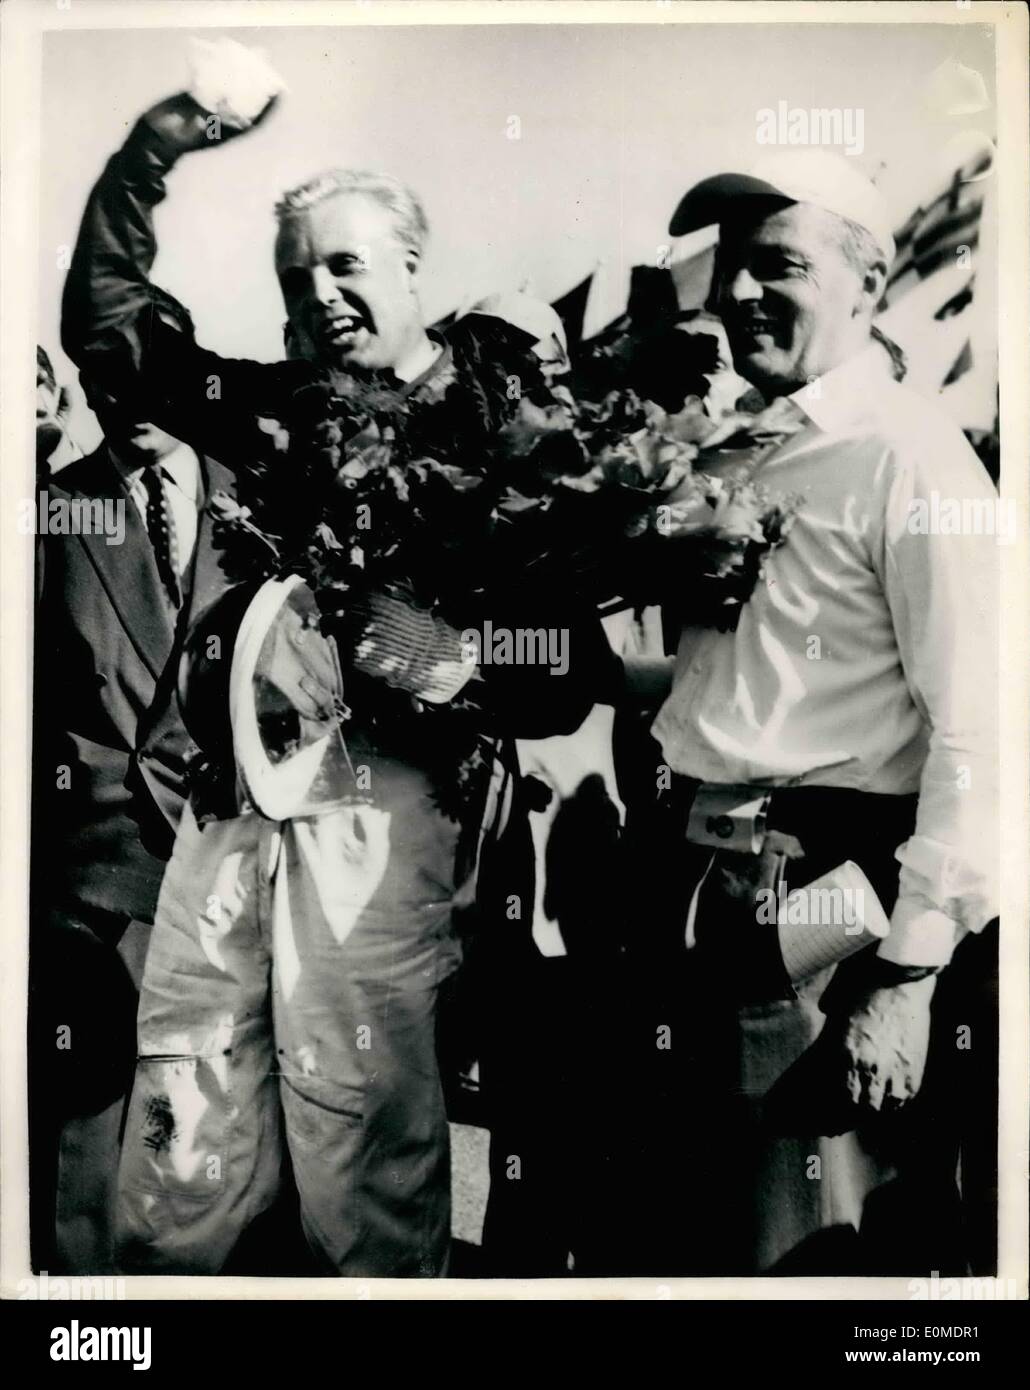 Oct. 26, 1954 - 26-10-54 Britain's Mike Hawthorn wins Spanish Grand Prix. Averages 98 mph in a Ferrari. Britain's Mike Hawthorn, the no. 1 driver for the Italian Ferrari team won the Grand Prix of Spain at Barcelona during the weekend. He averaged 98 mph for the 314 mile race. Keystone Photo Shows: Mike Hawthorn acknowledges the cheers of the crowd after his great win. Stock Photo